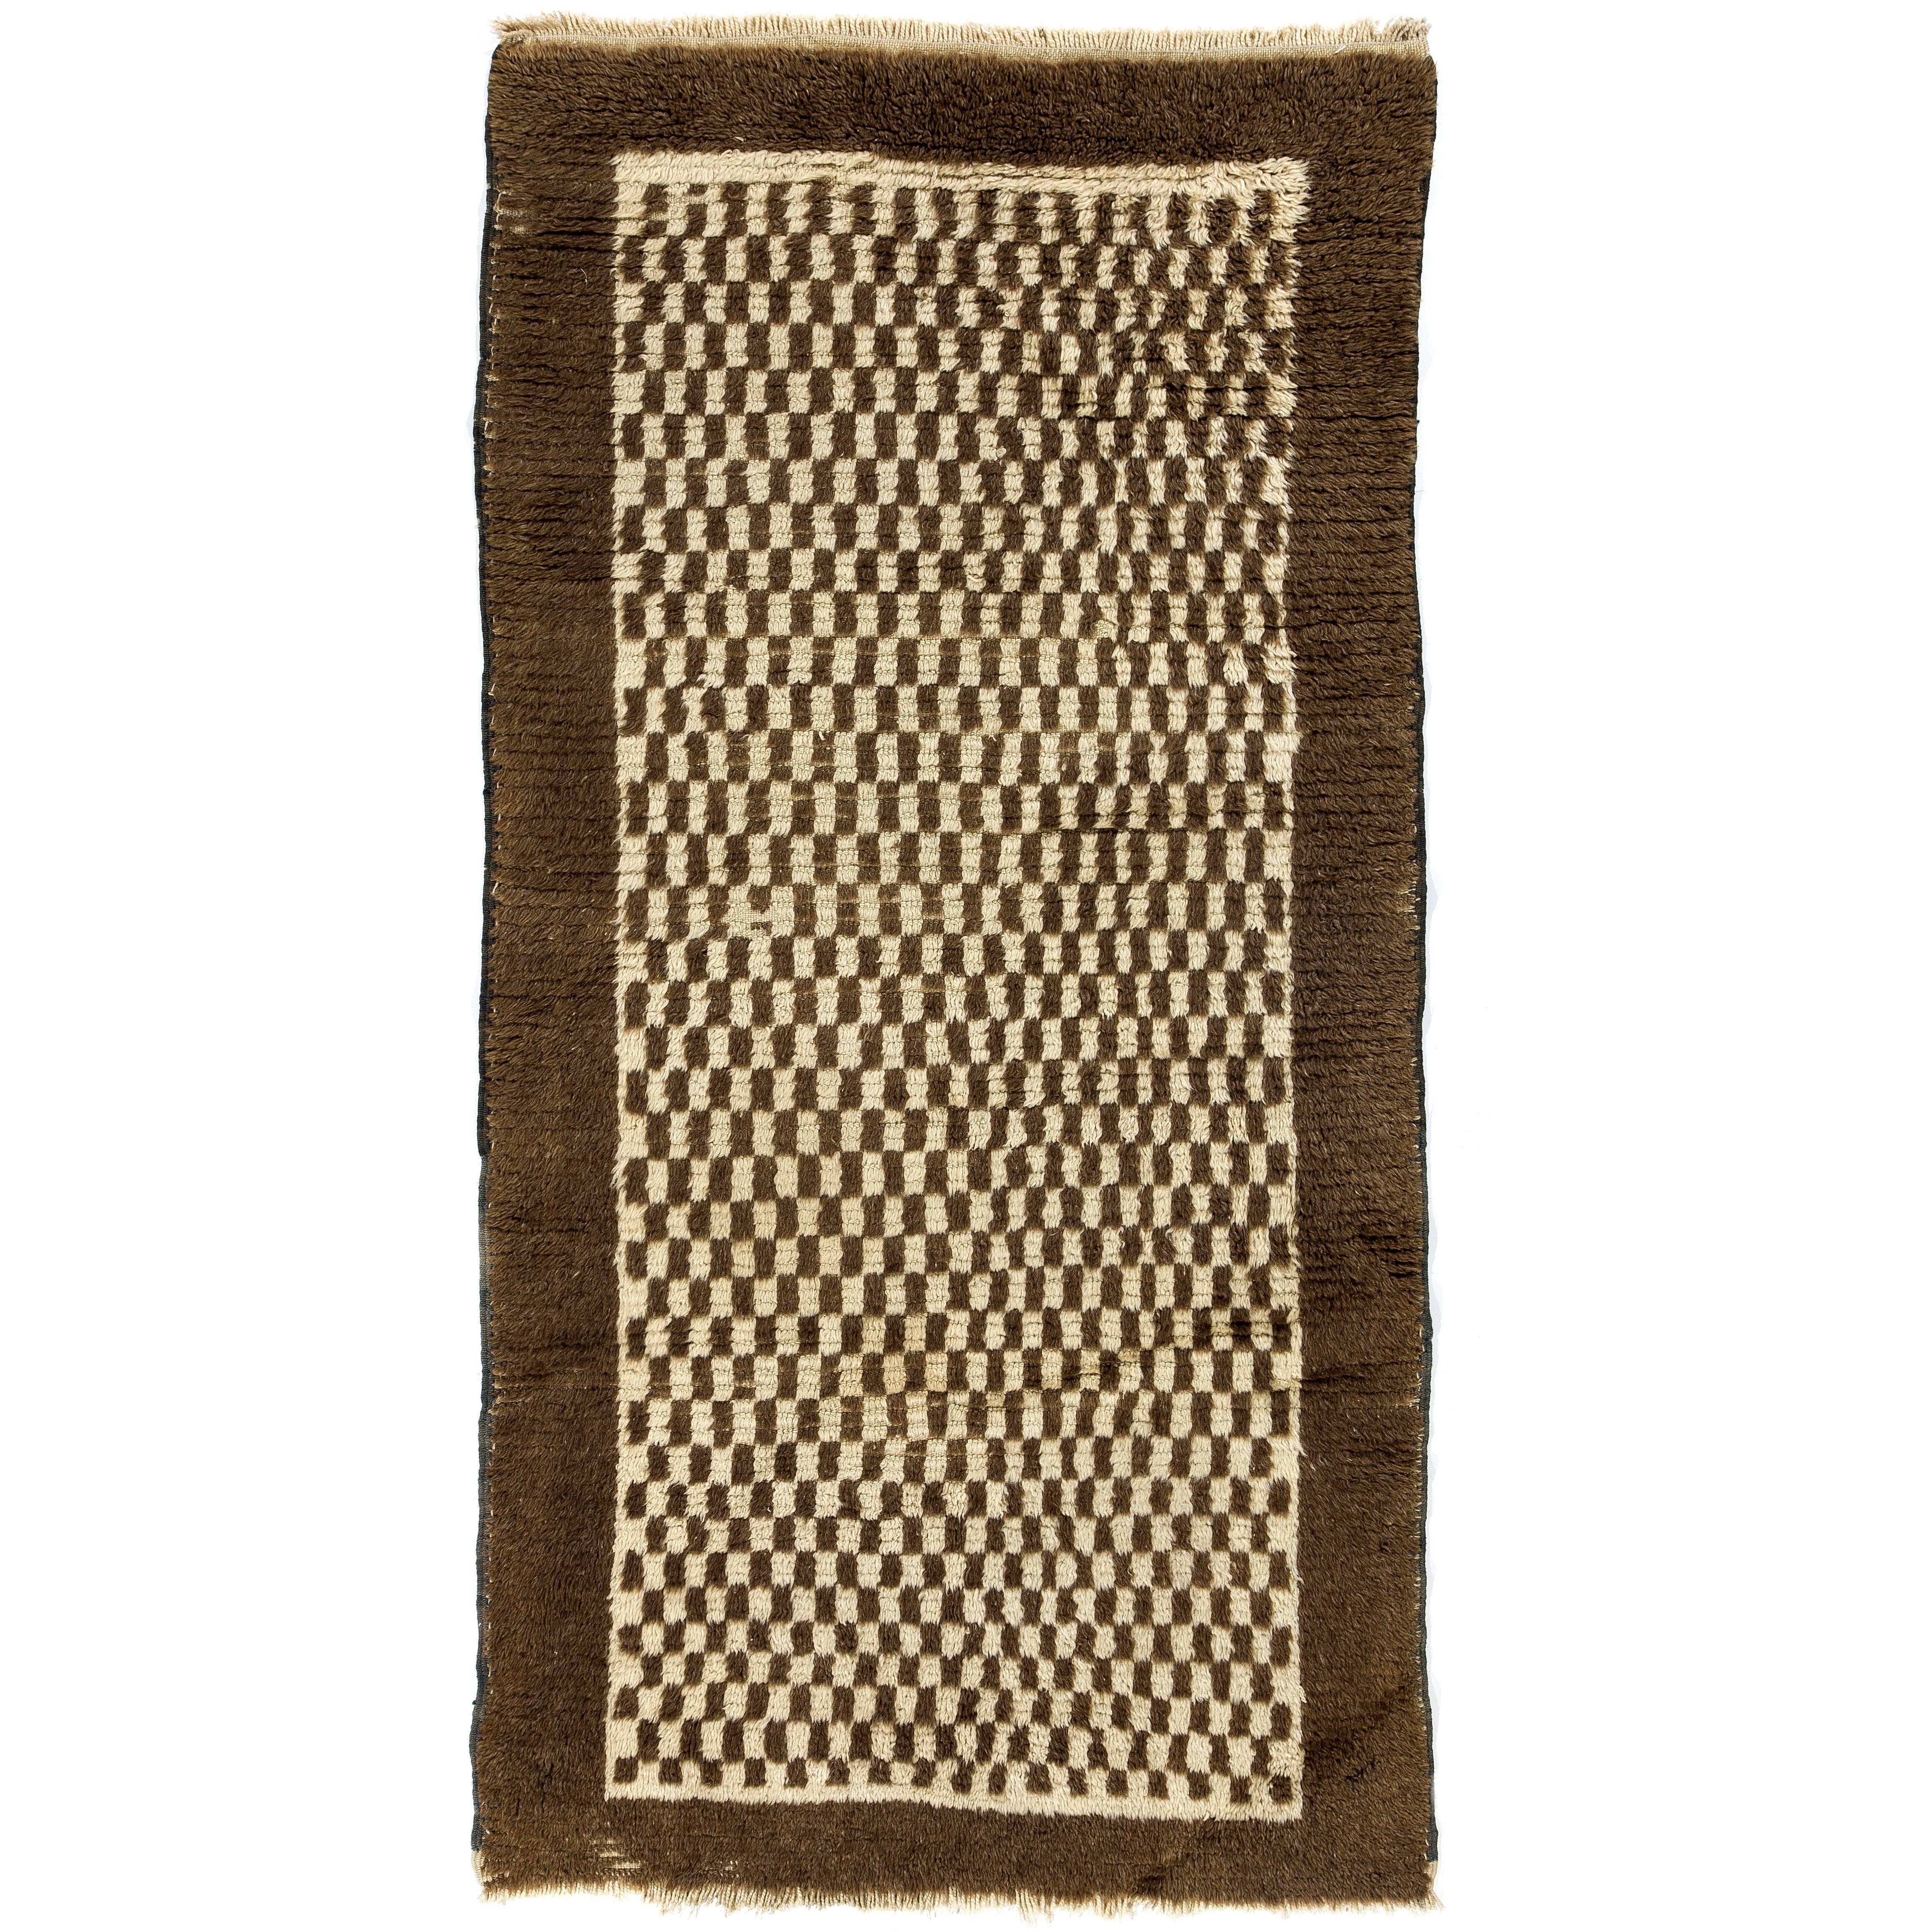 Chequered "Tulu" Rug made of Natural Undyed Wool